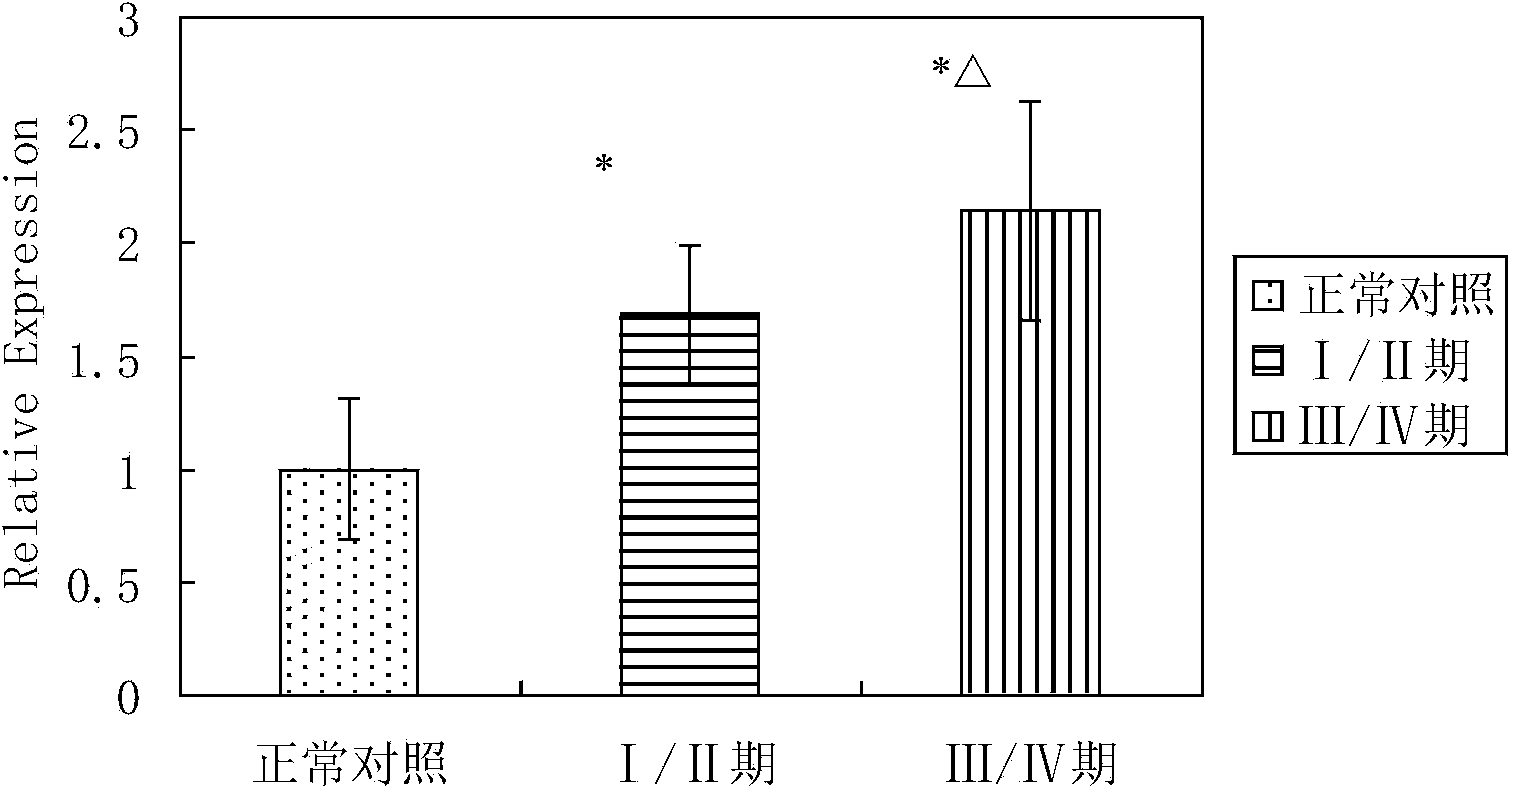 Marker for B cell non-hodgkin lymphoma and drug resistance detection thereof